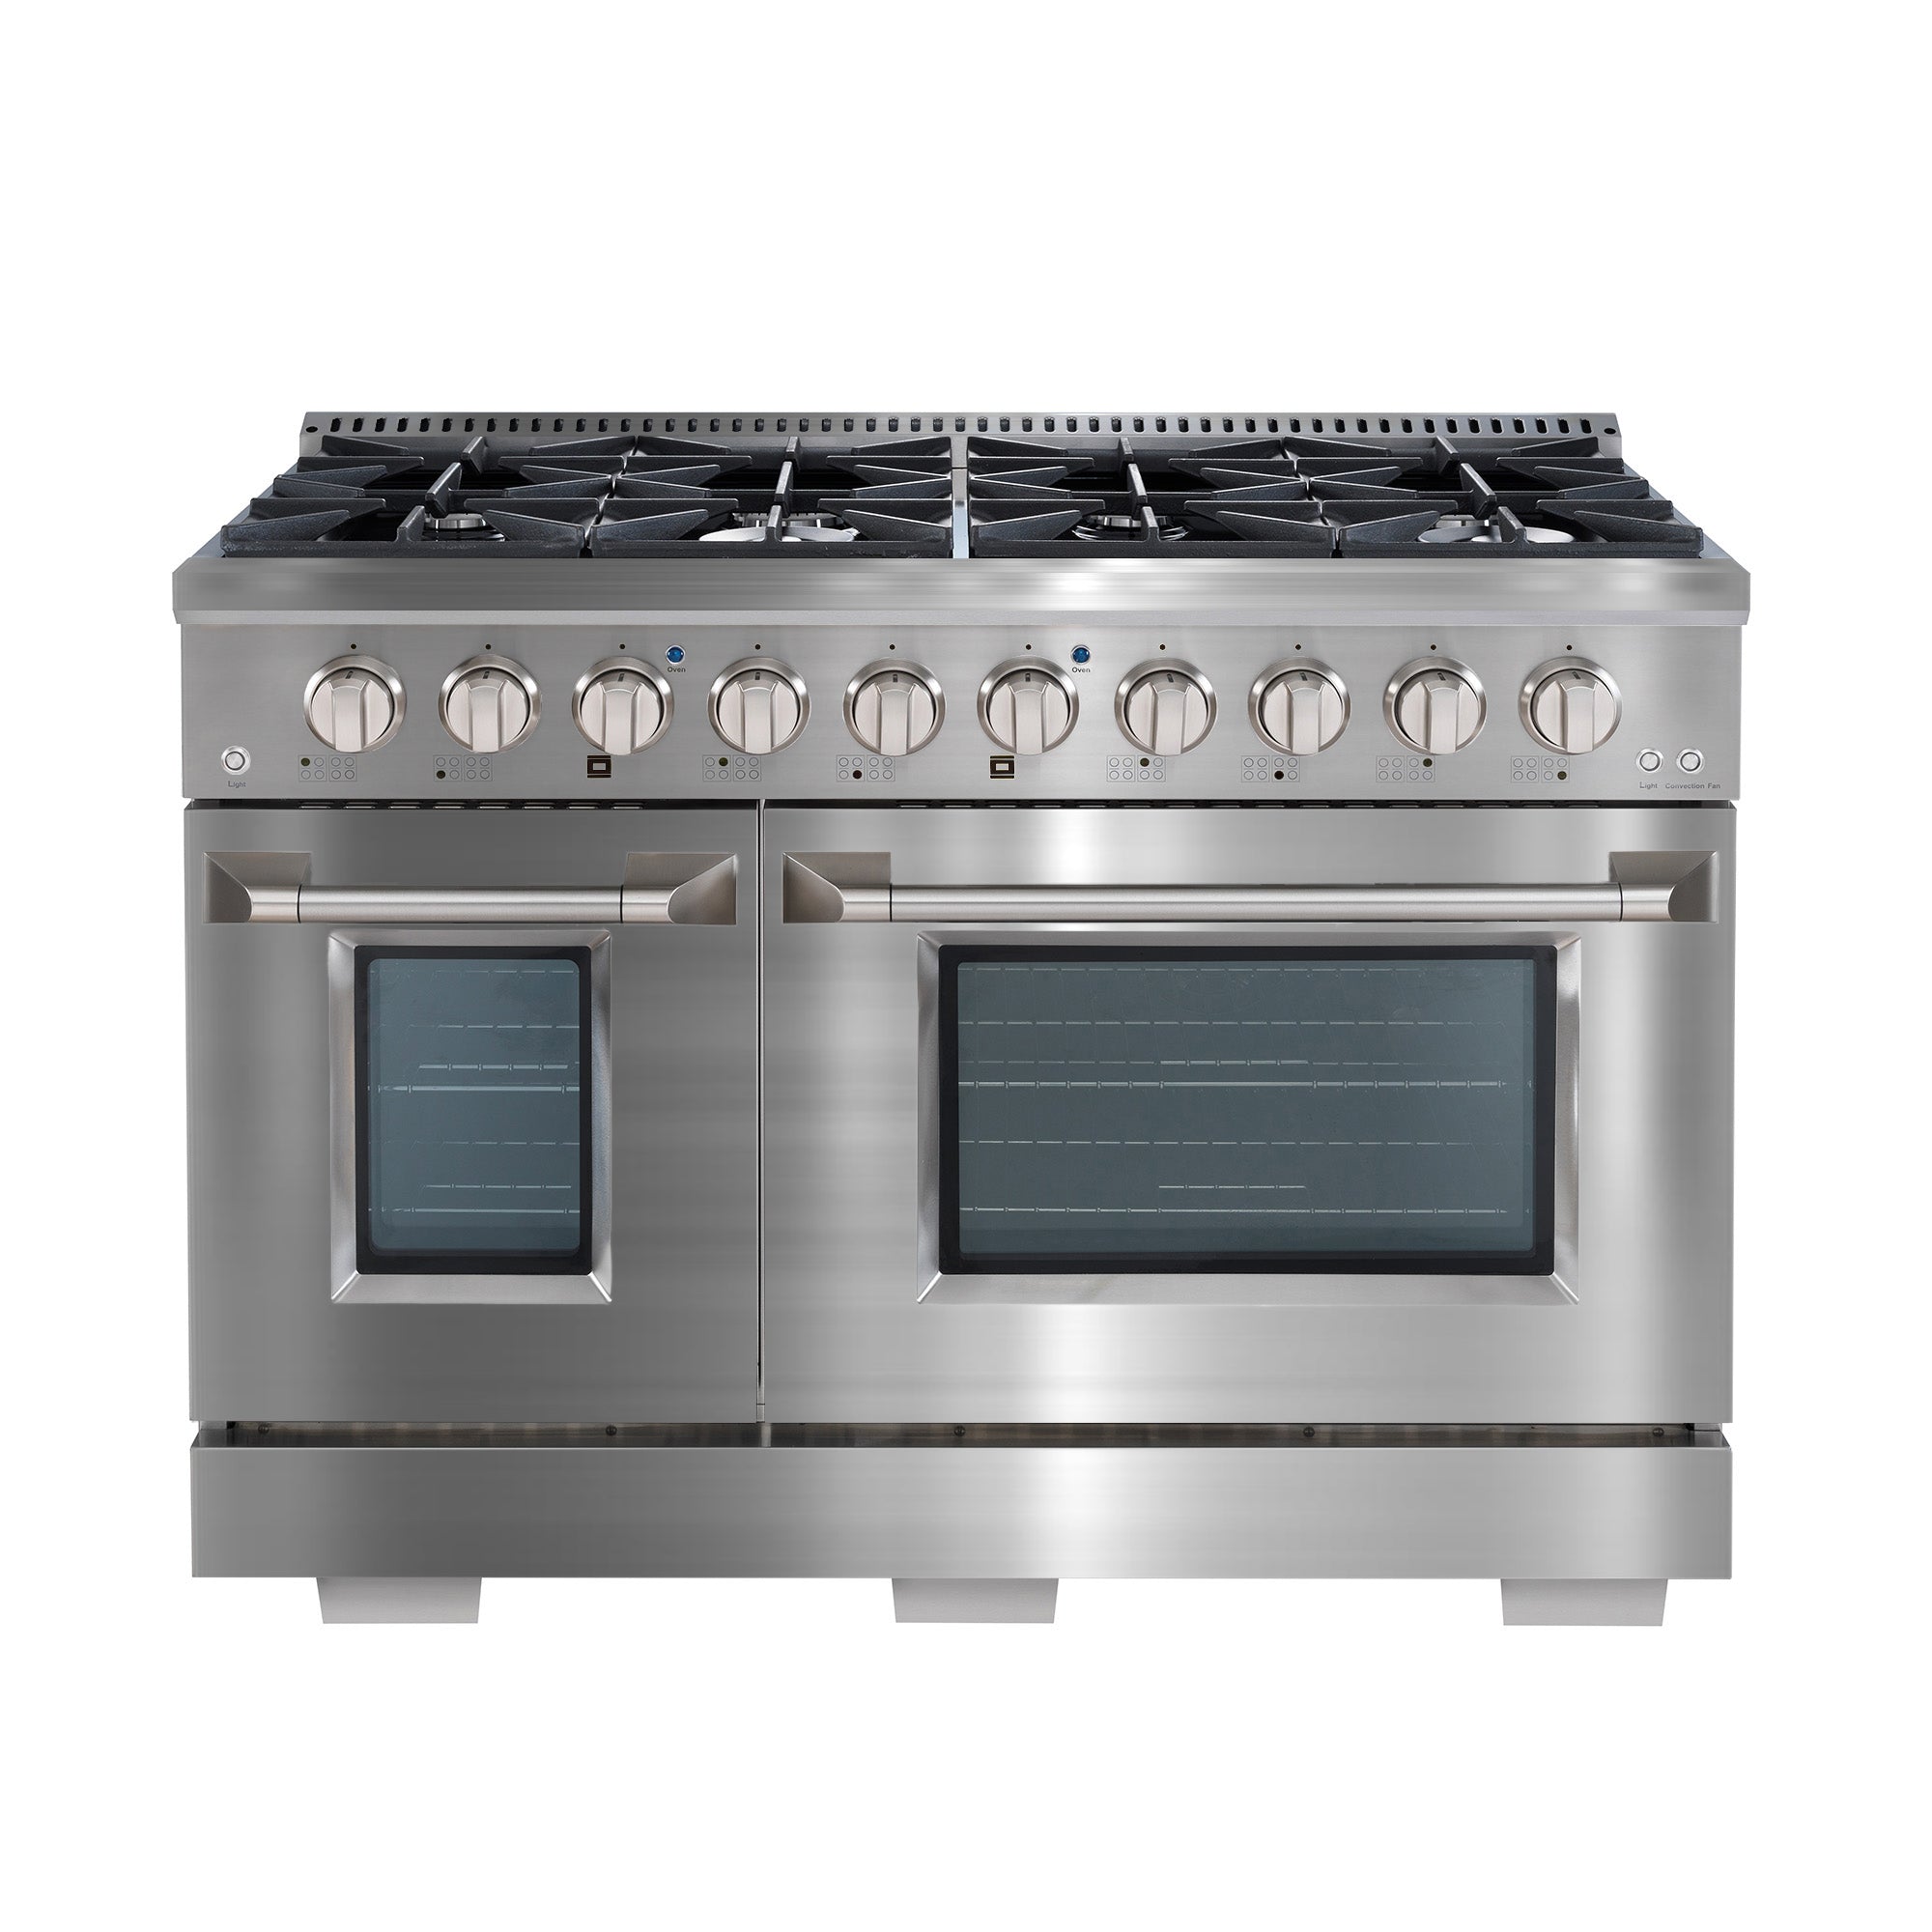 Ancona 48” 6.7 cu. ft Double Oven Gas Range with 8 Burners including Griddle/Grill and Convection Oven in Stainless Steel